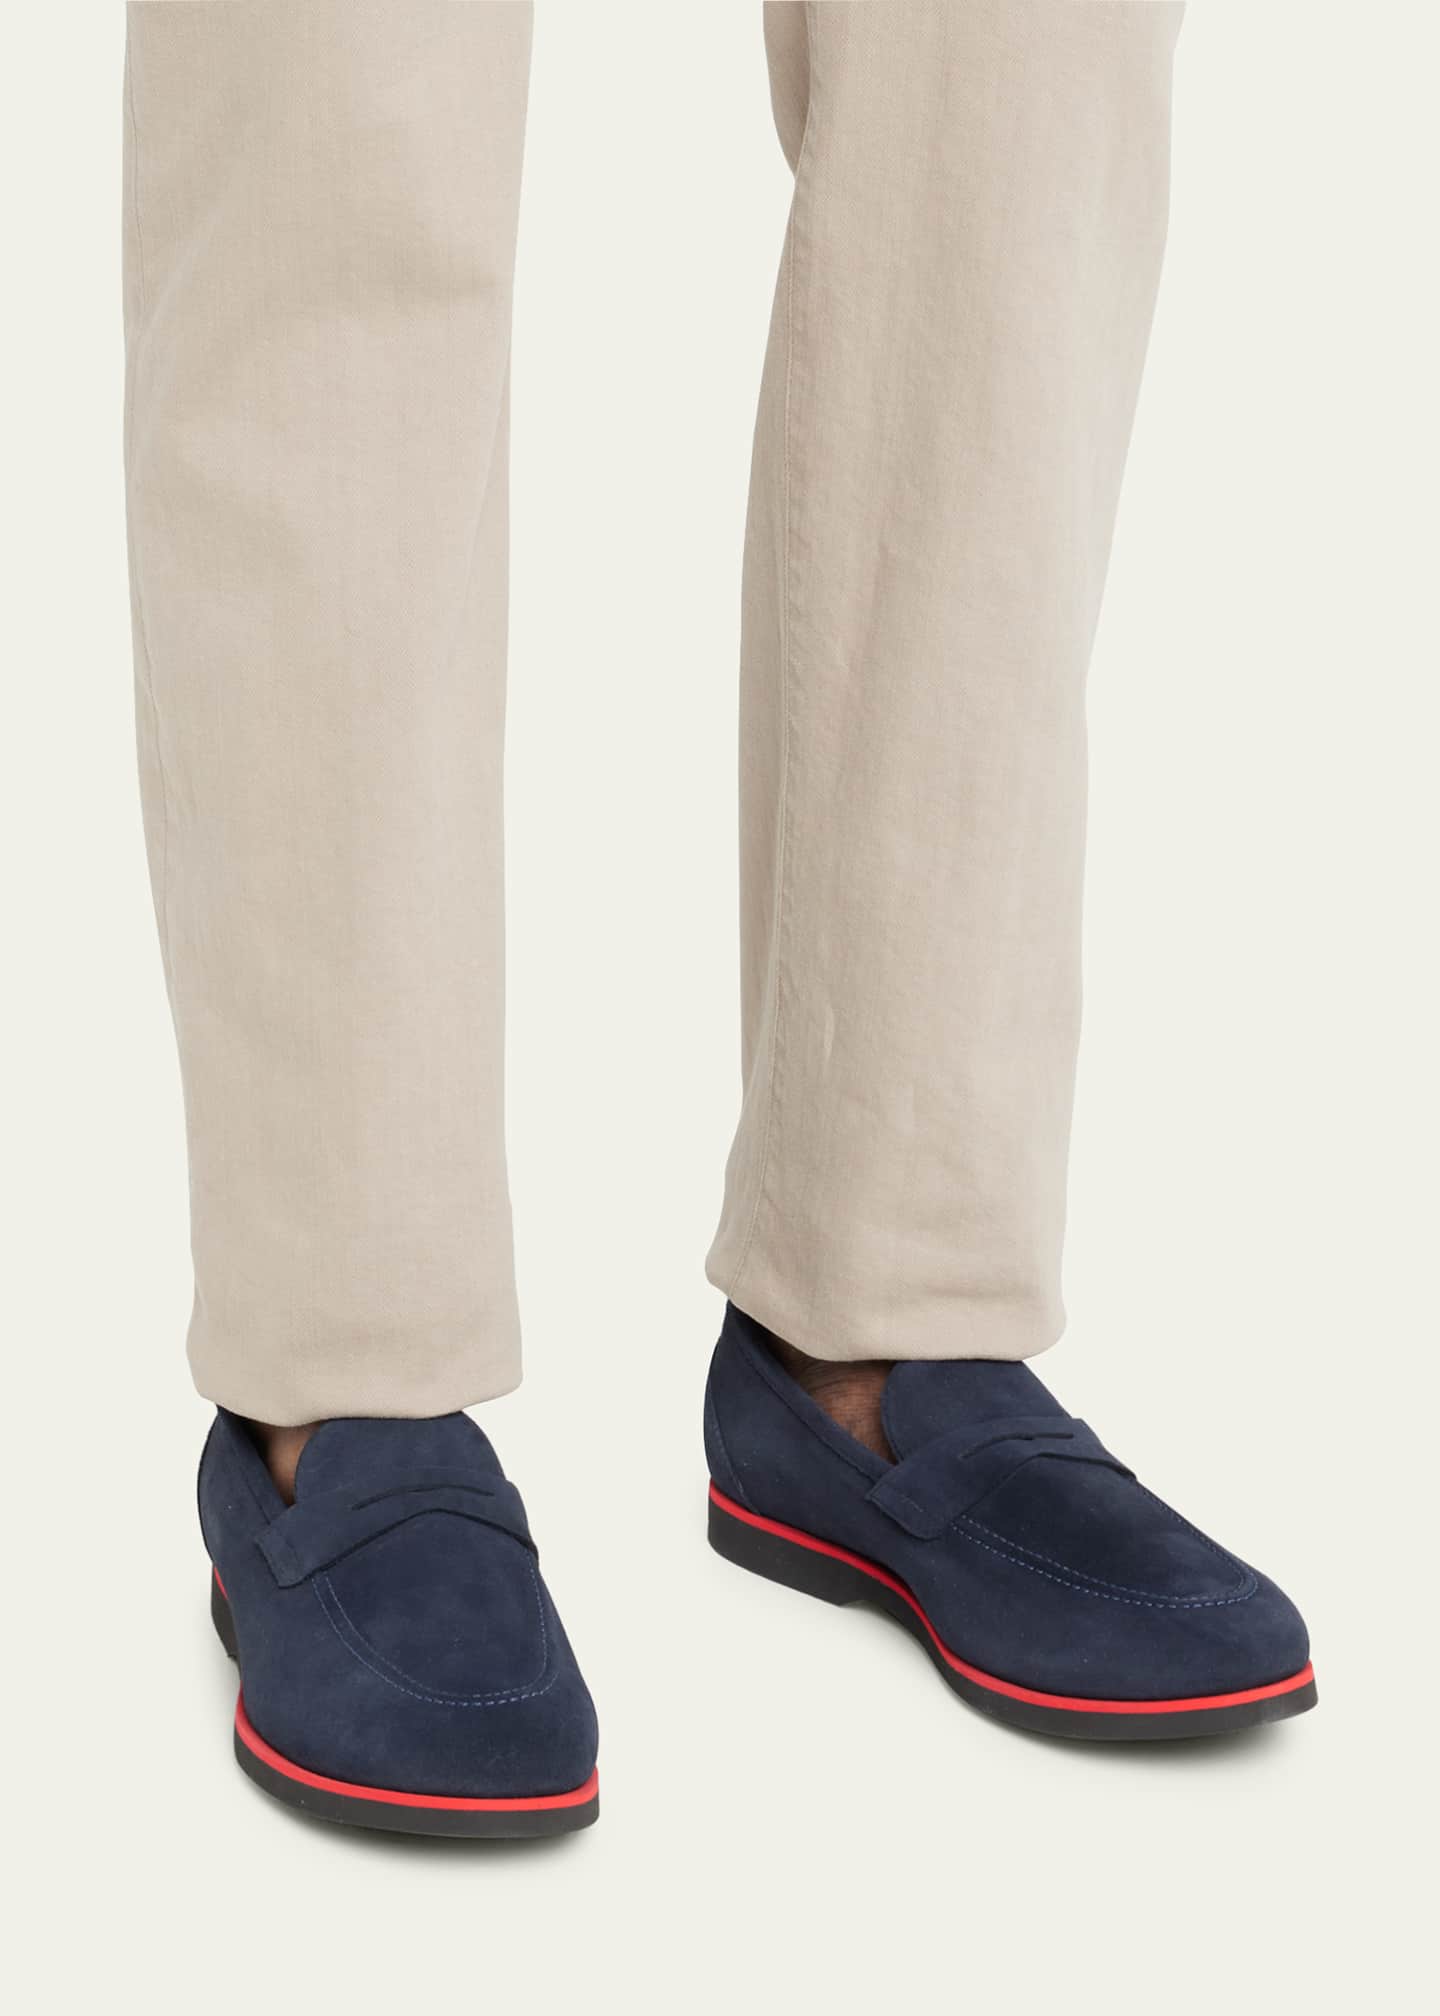 Men's Loafers & Slip-On Shoes at Bergdorf Goodman